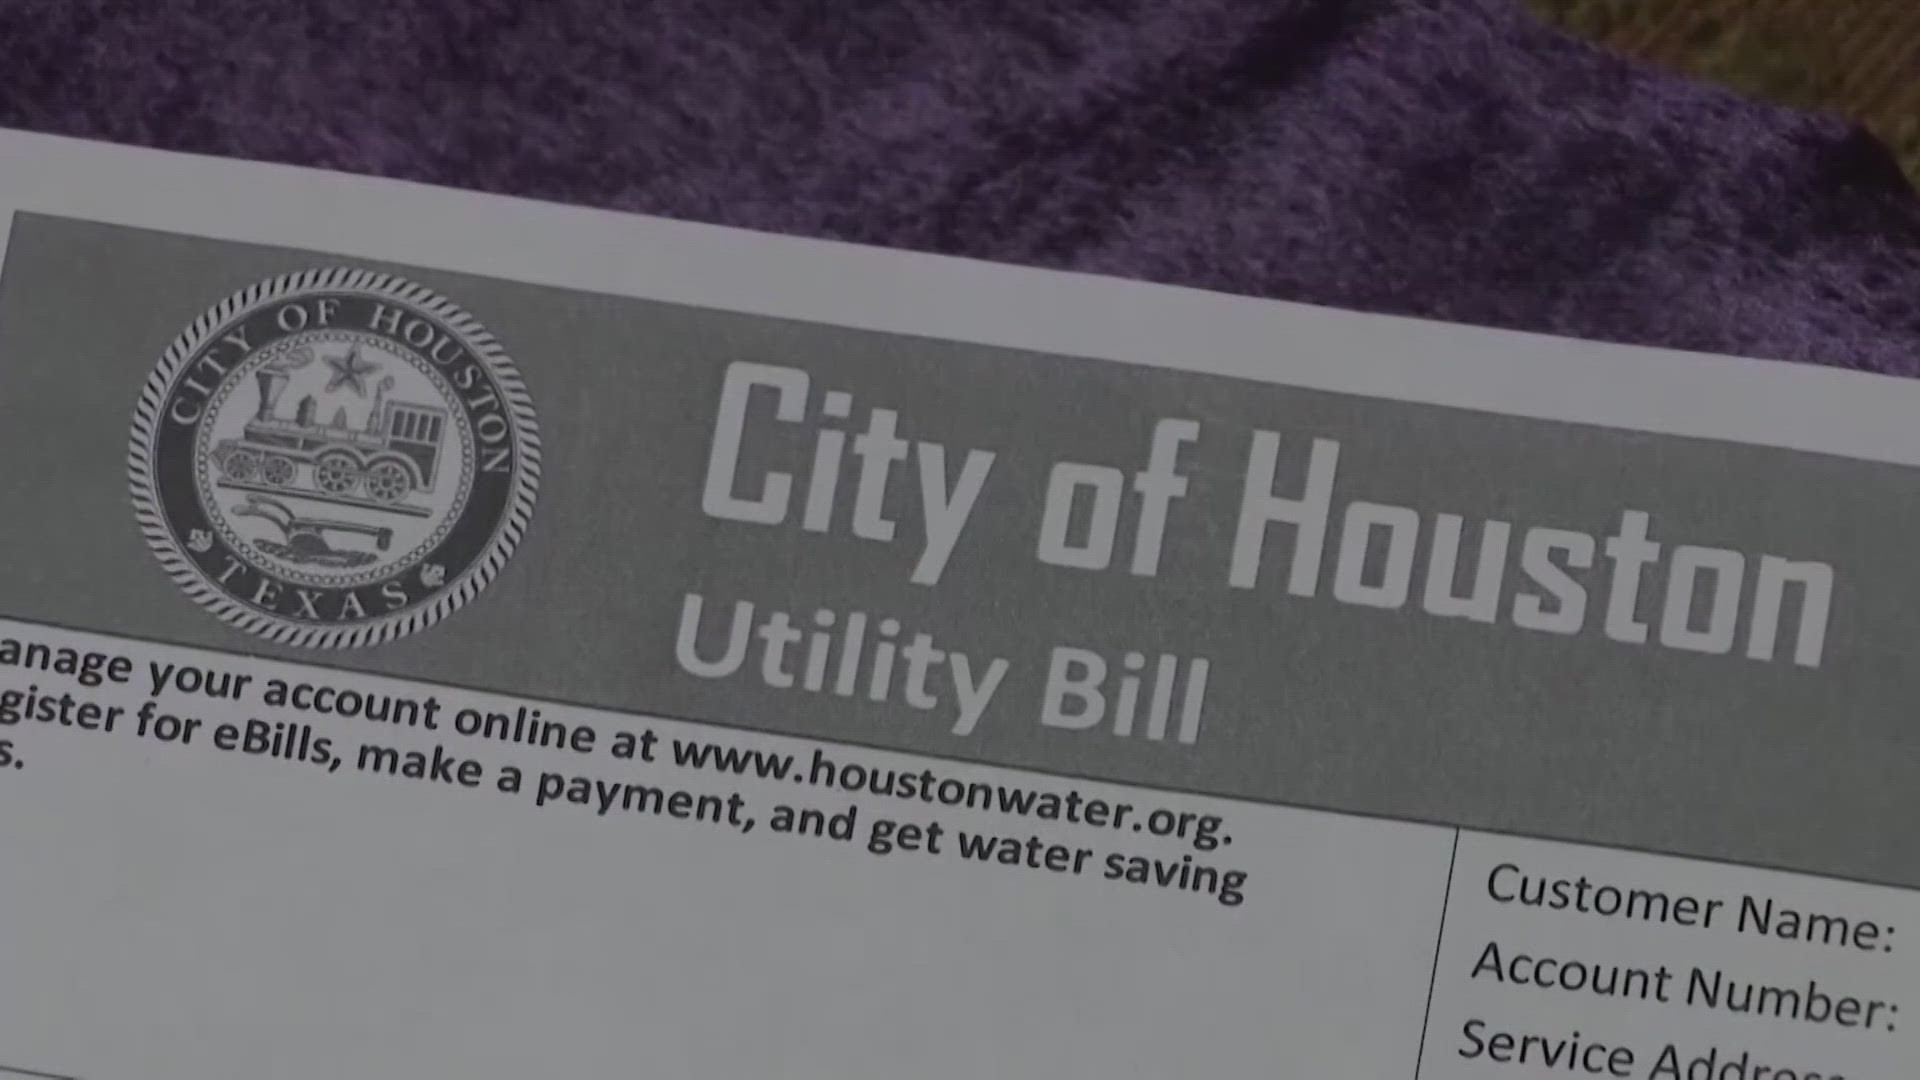 Previously, a certain code allowed for city employees to be fired if they lowered a customer's water bill.